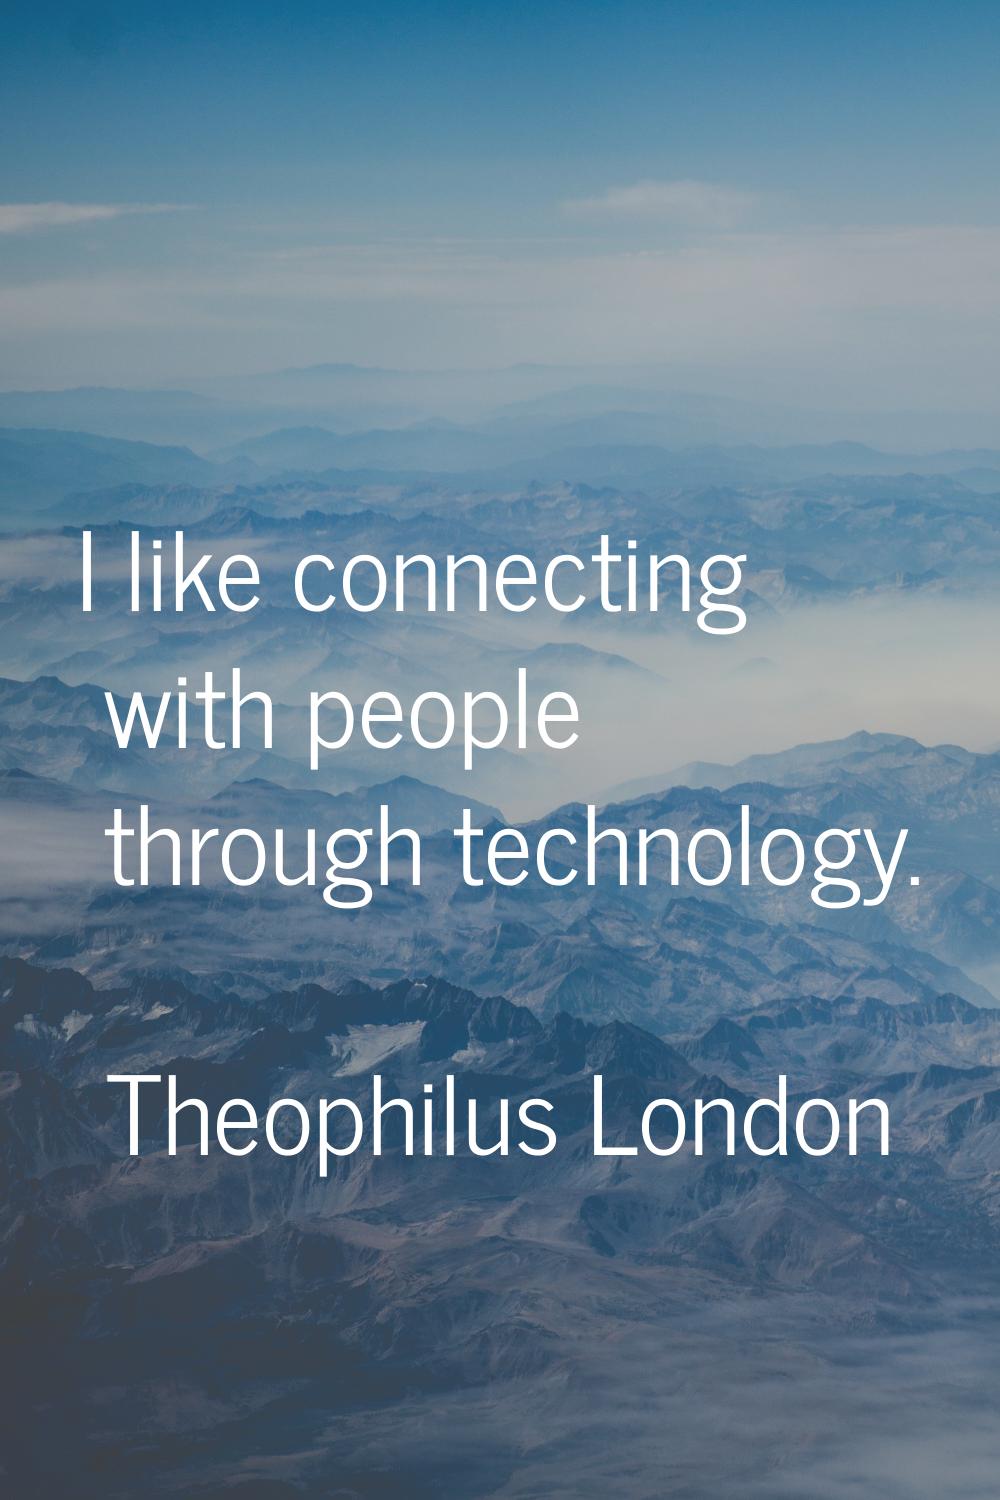 I like connecting with people through technology.